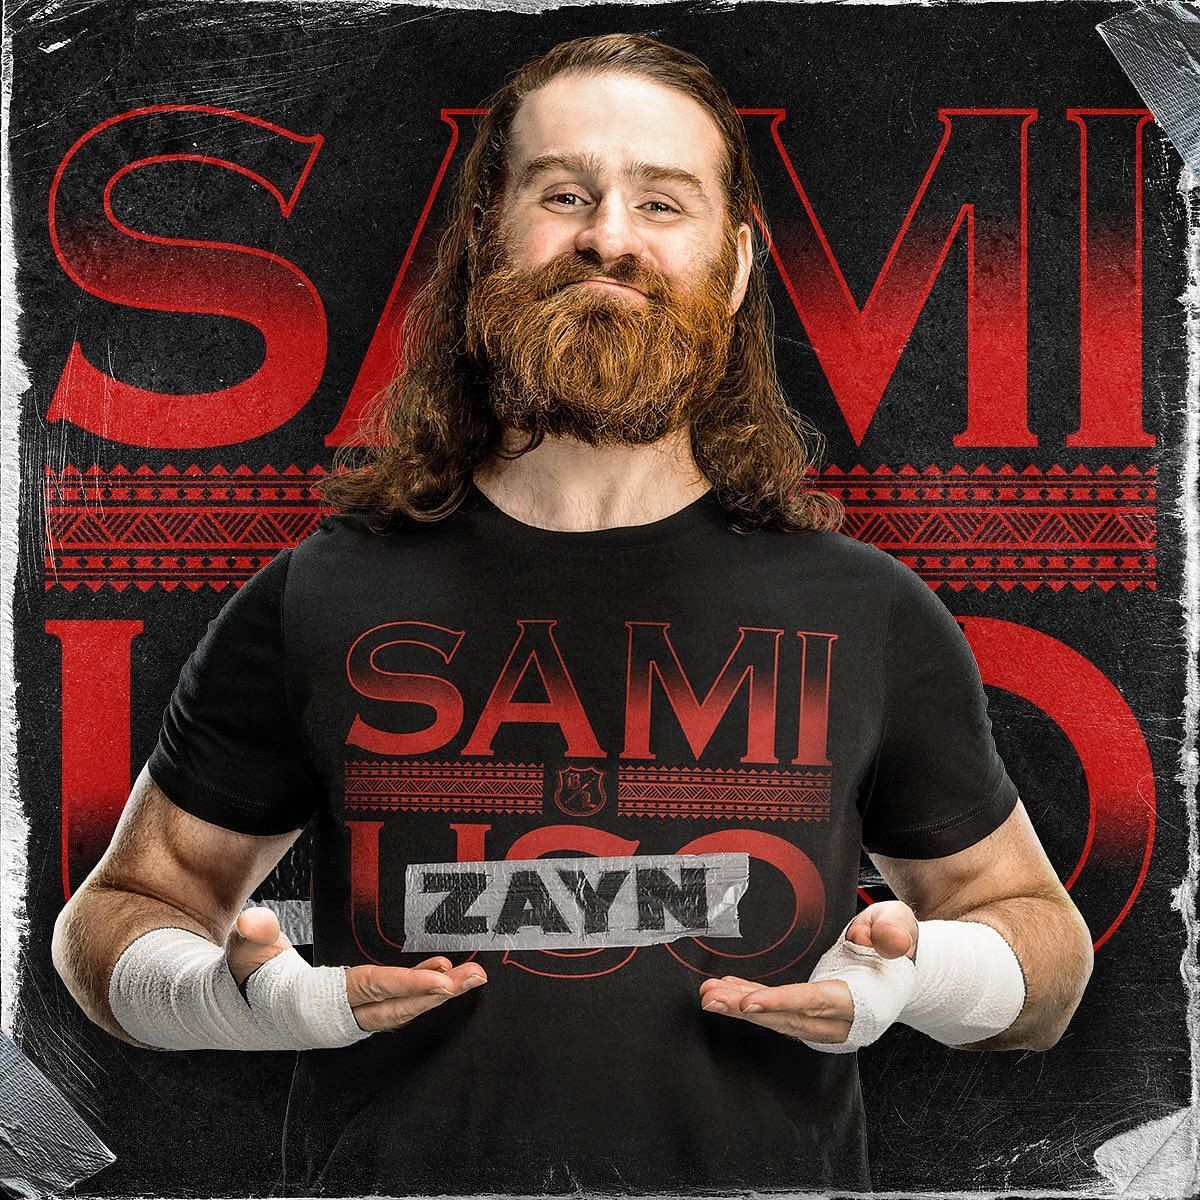 Sami Zayn trended all weekend following his actions at the 2023 Royal Rumble